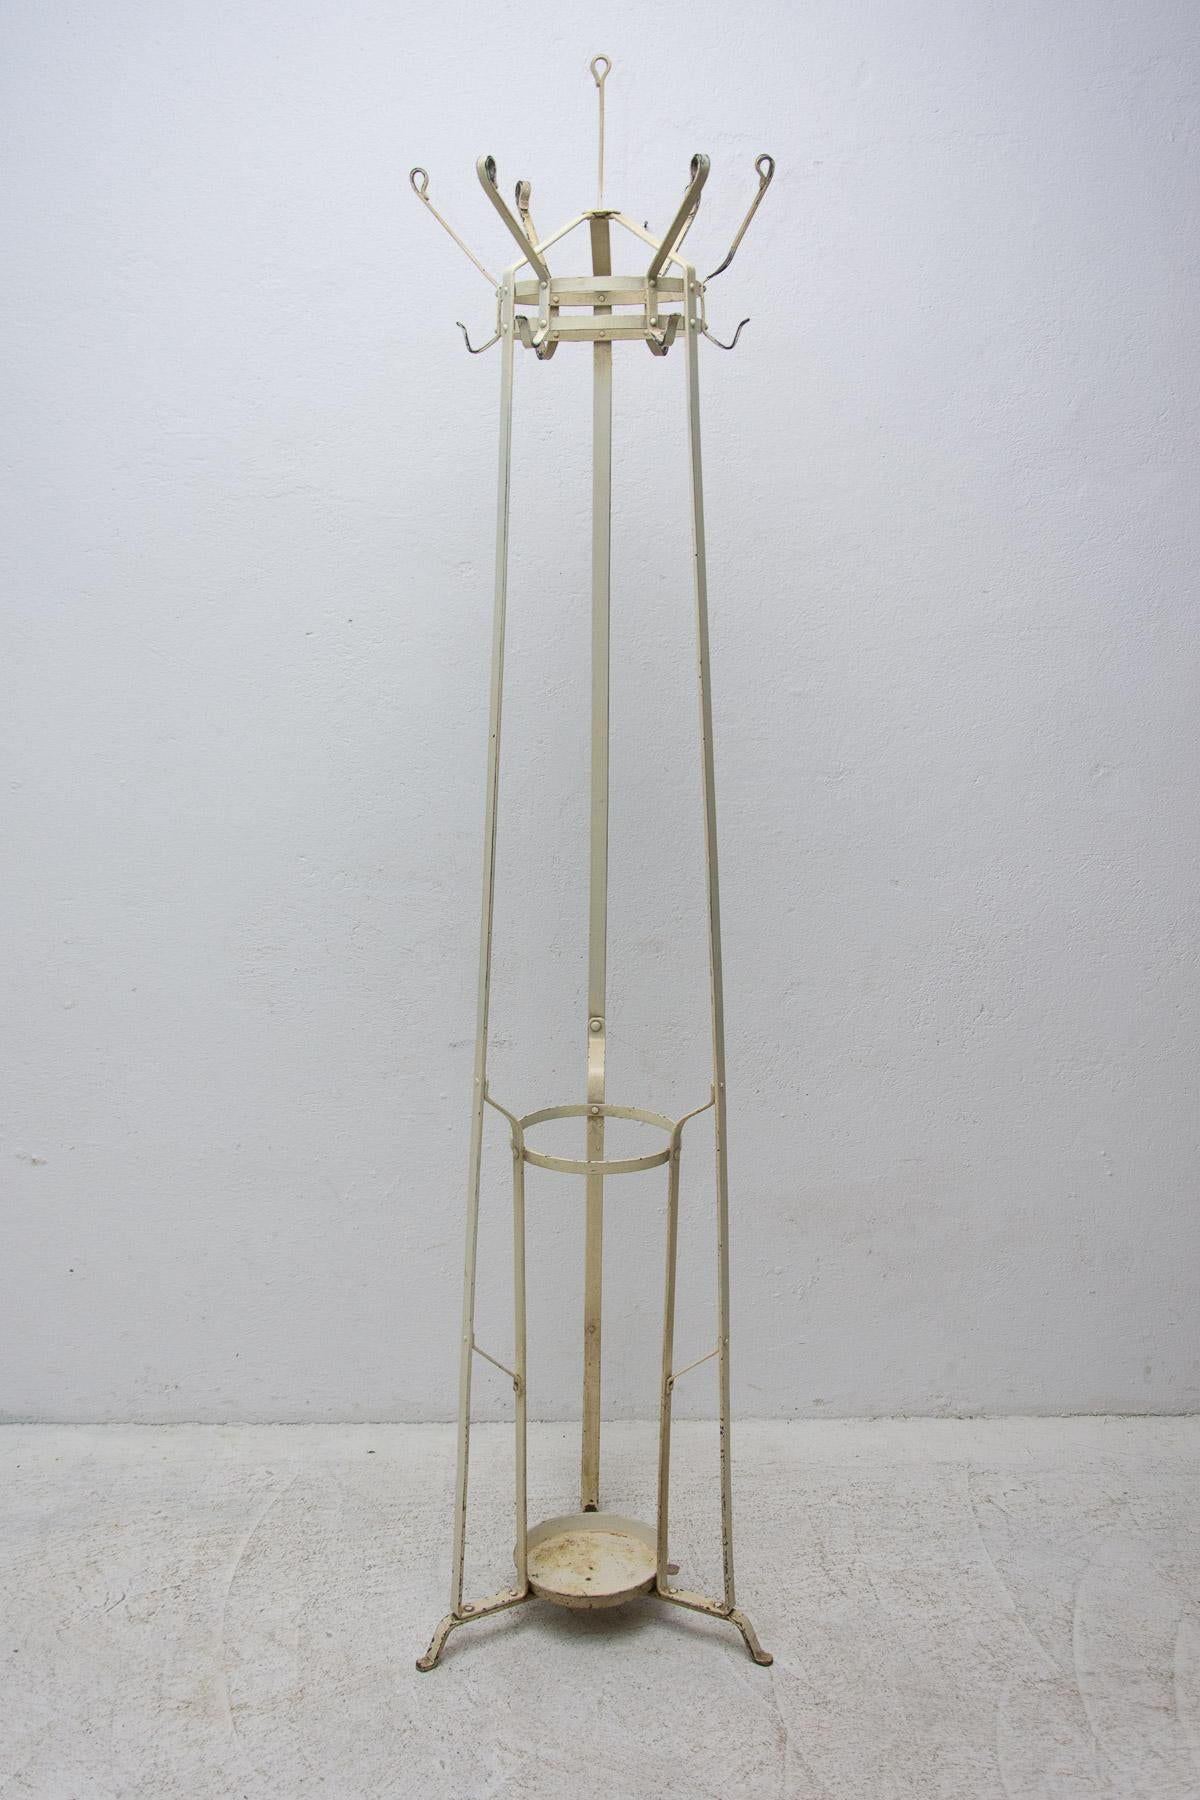 This metal coat rack model is a beautiful example of central European Art Nouveau. It was made in Bohemia in the 1920s. It features an all-metal structure with rounded tips at the ends and umbrella holder. This coat rack is in good Vintage condition